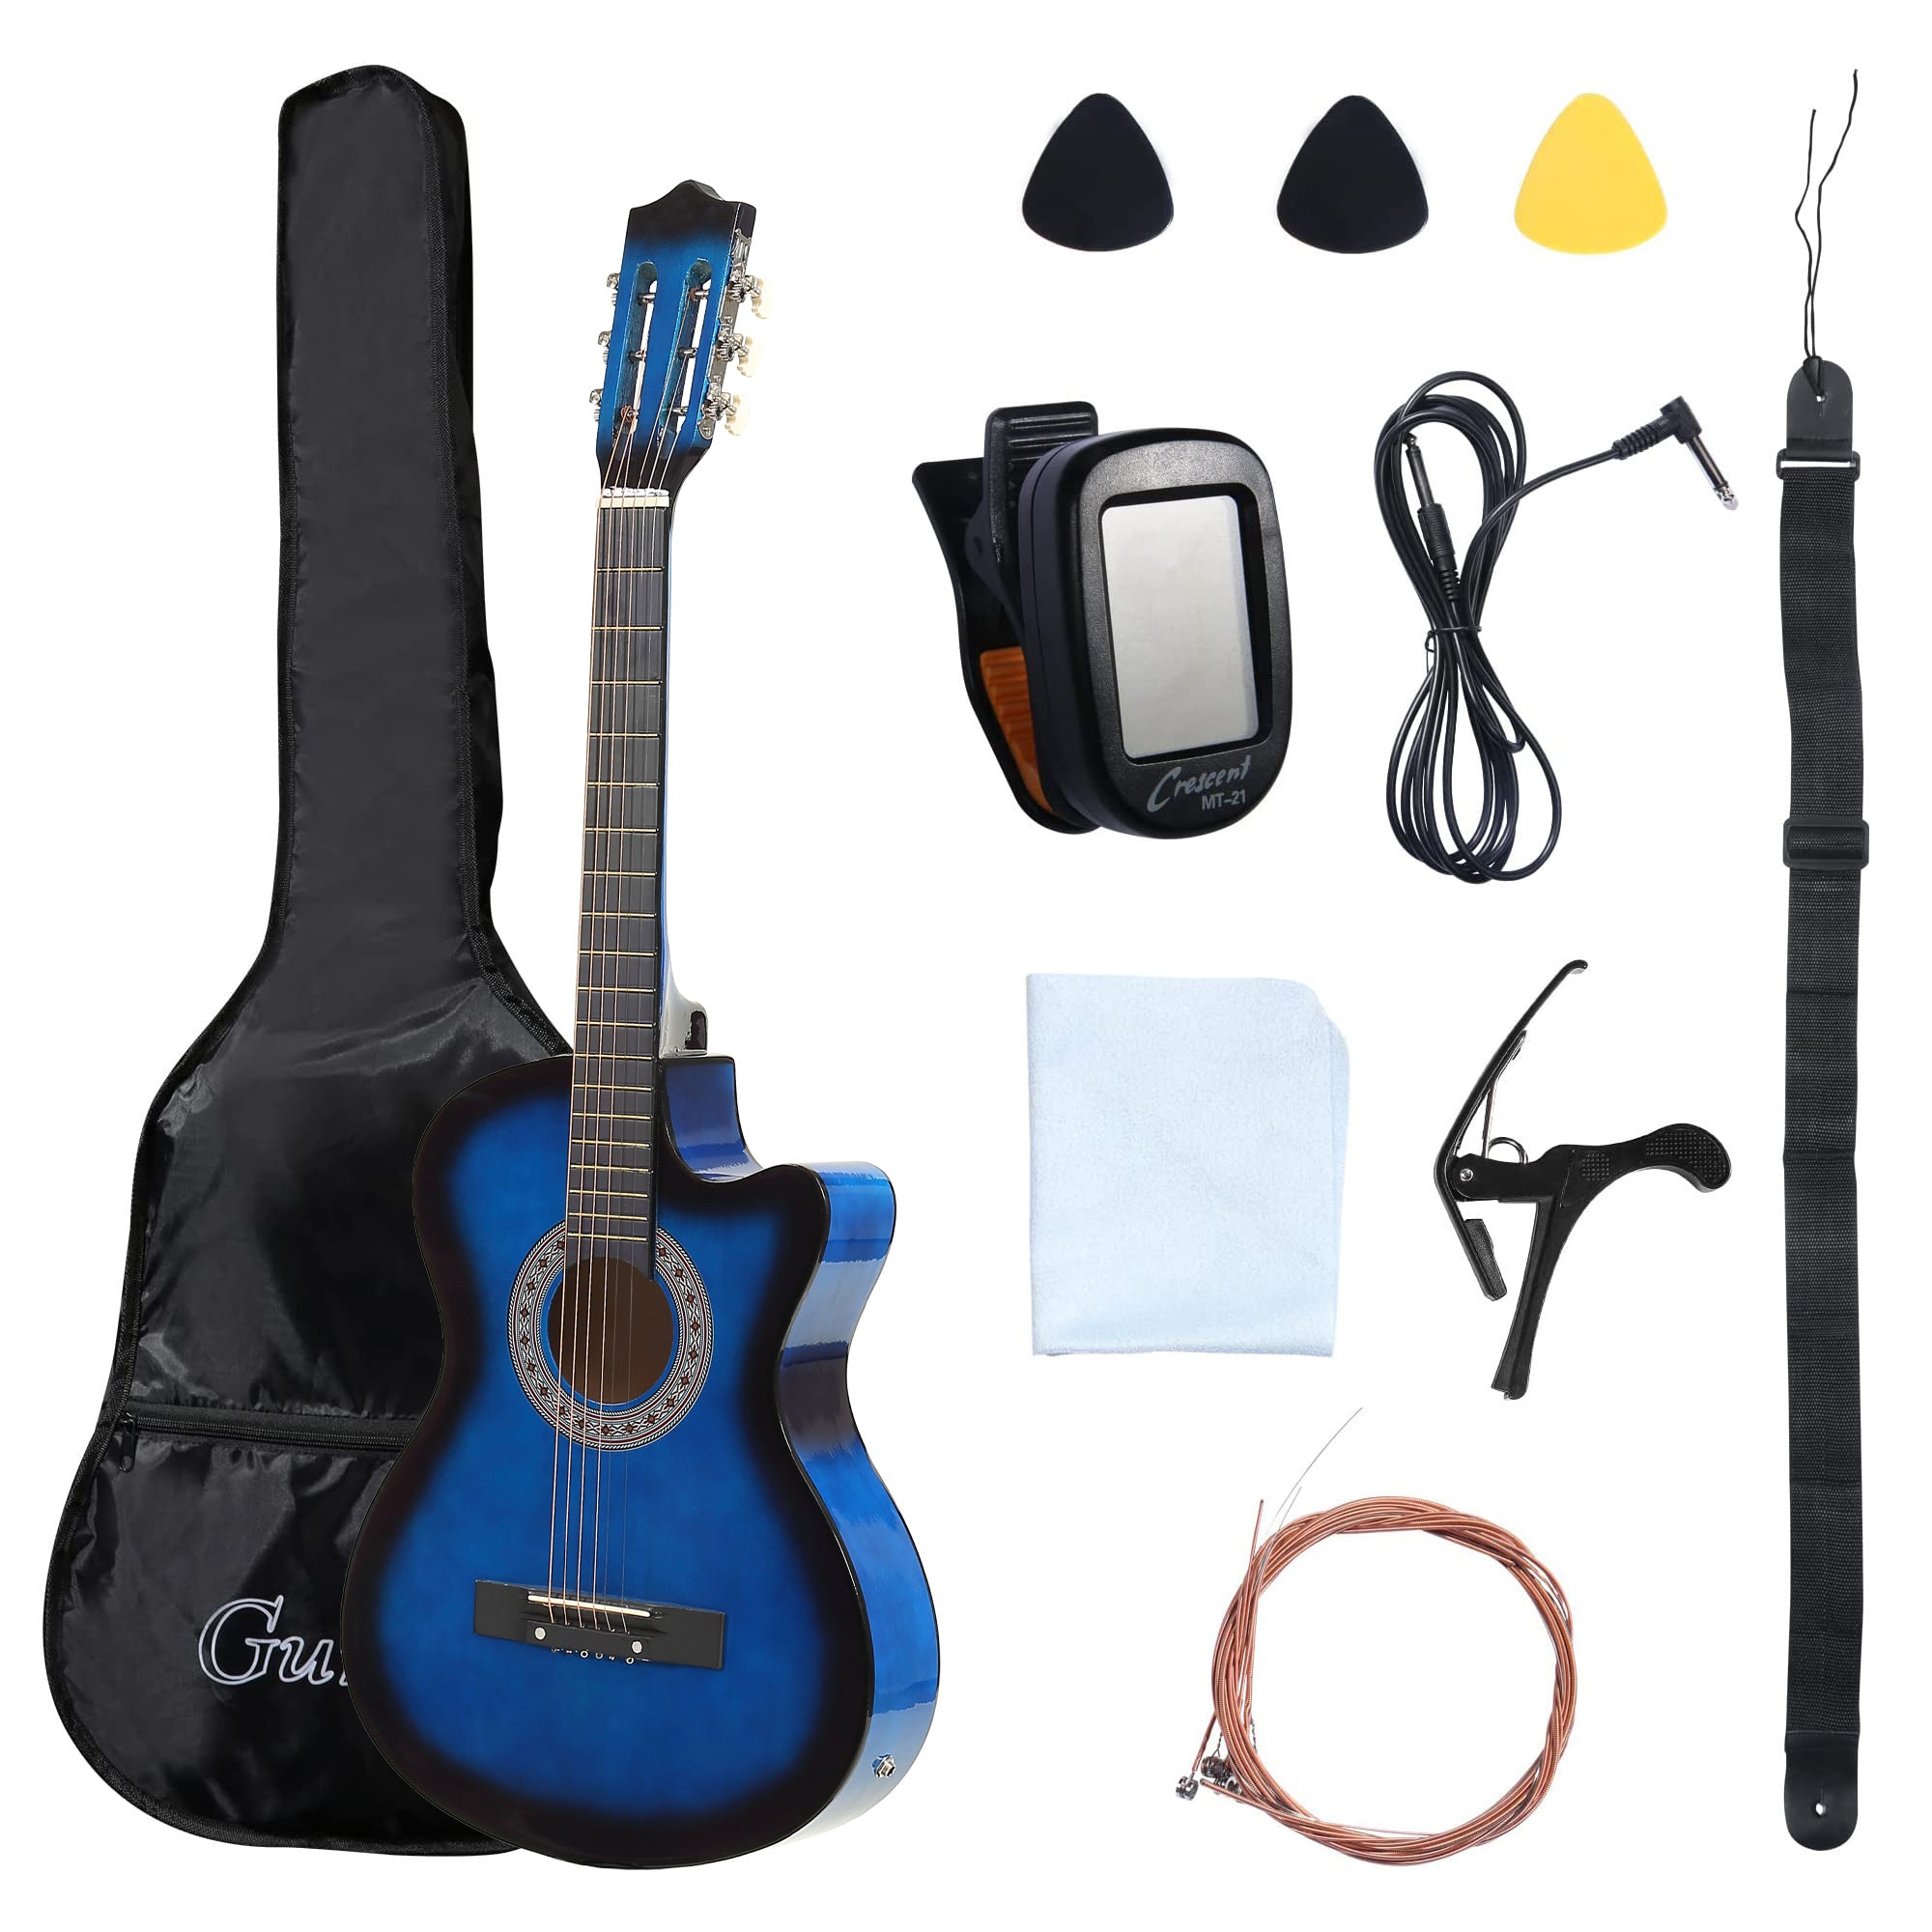 38" Acoustic Electric Guitar for Beginners All Wood Classic Guitar, Blue